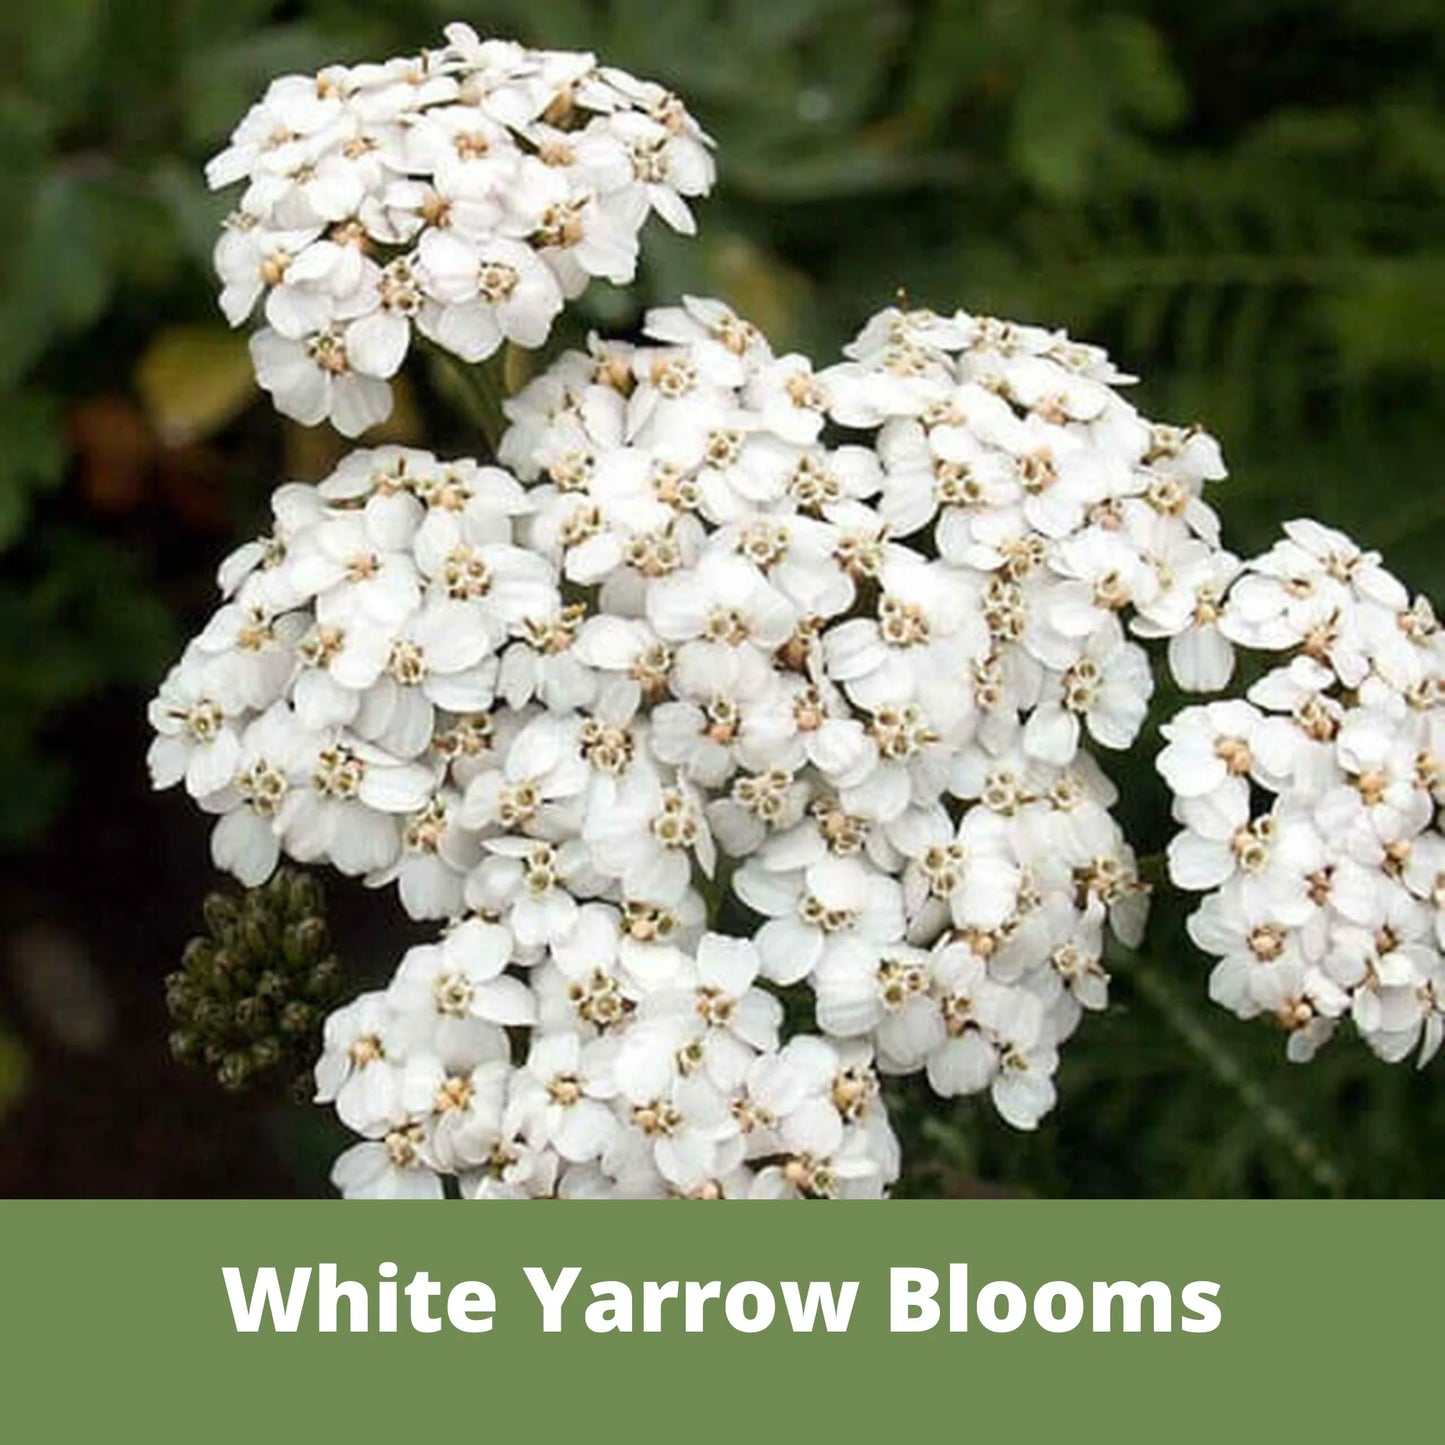 White Yarrow Seed Pouch